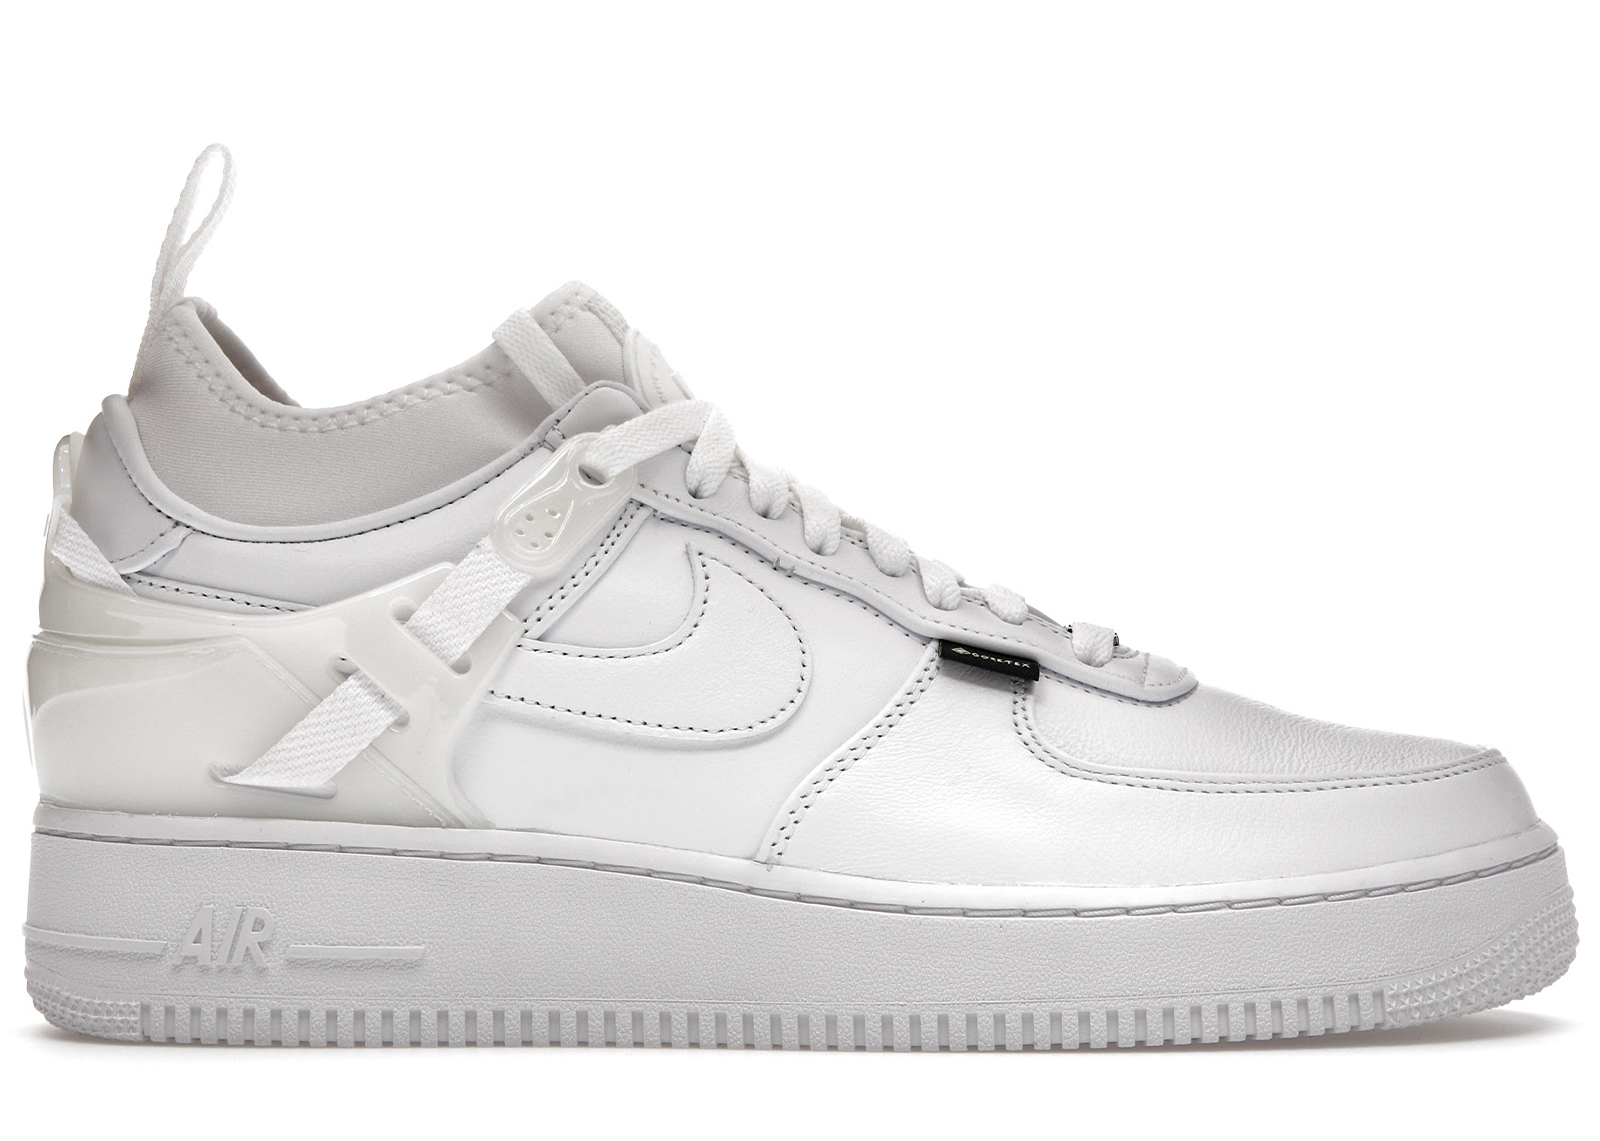 Nike Air Force 1 Low SP, Undercover White